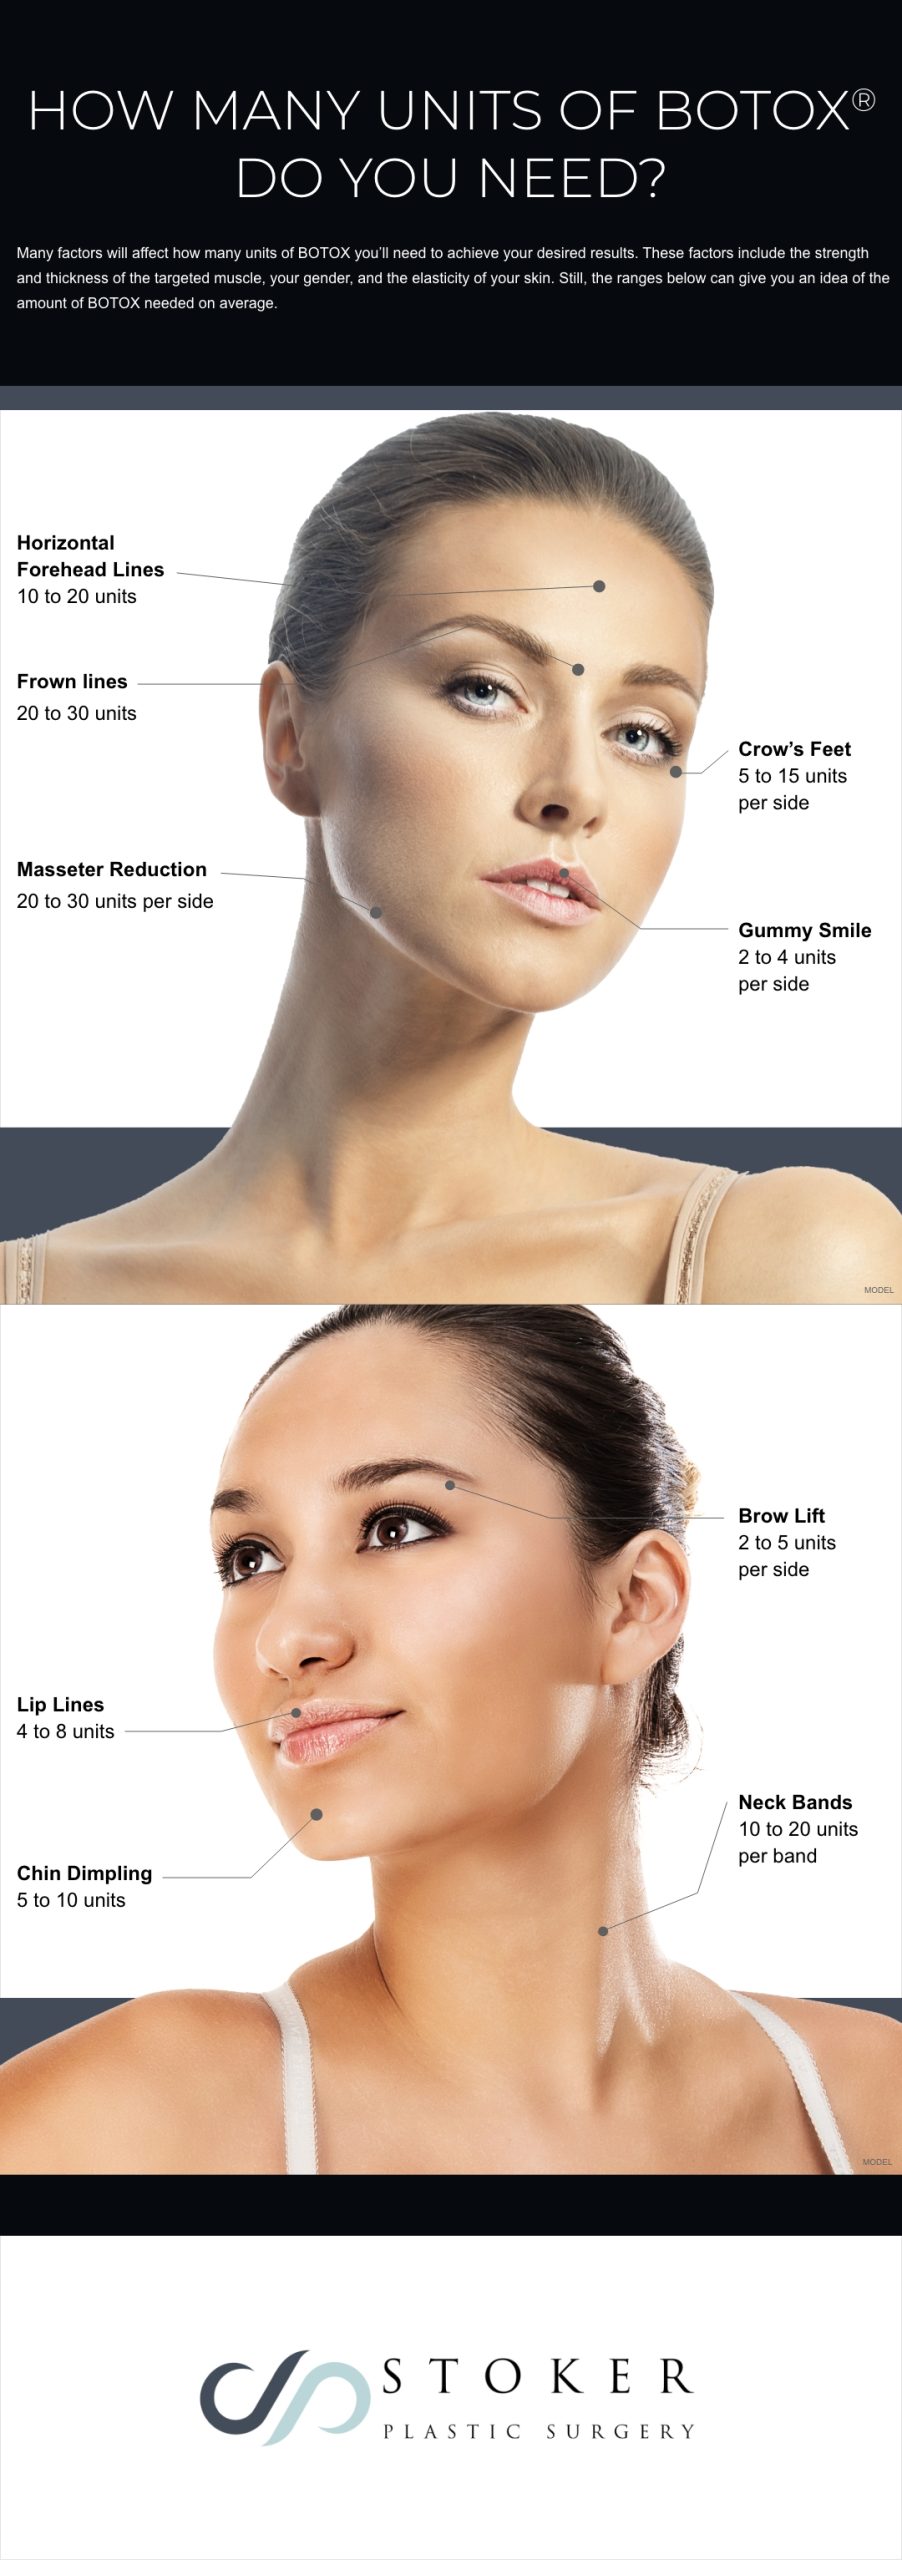 Infographic on "How many units of BOTOX® do you need?